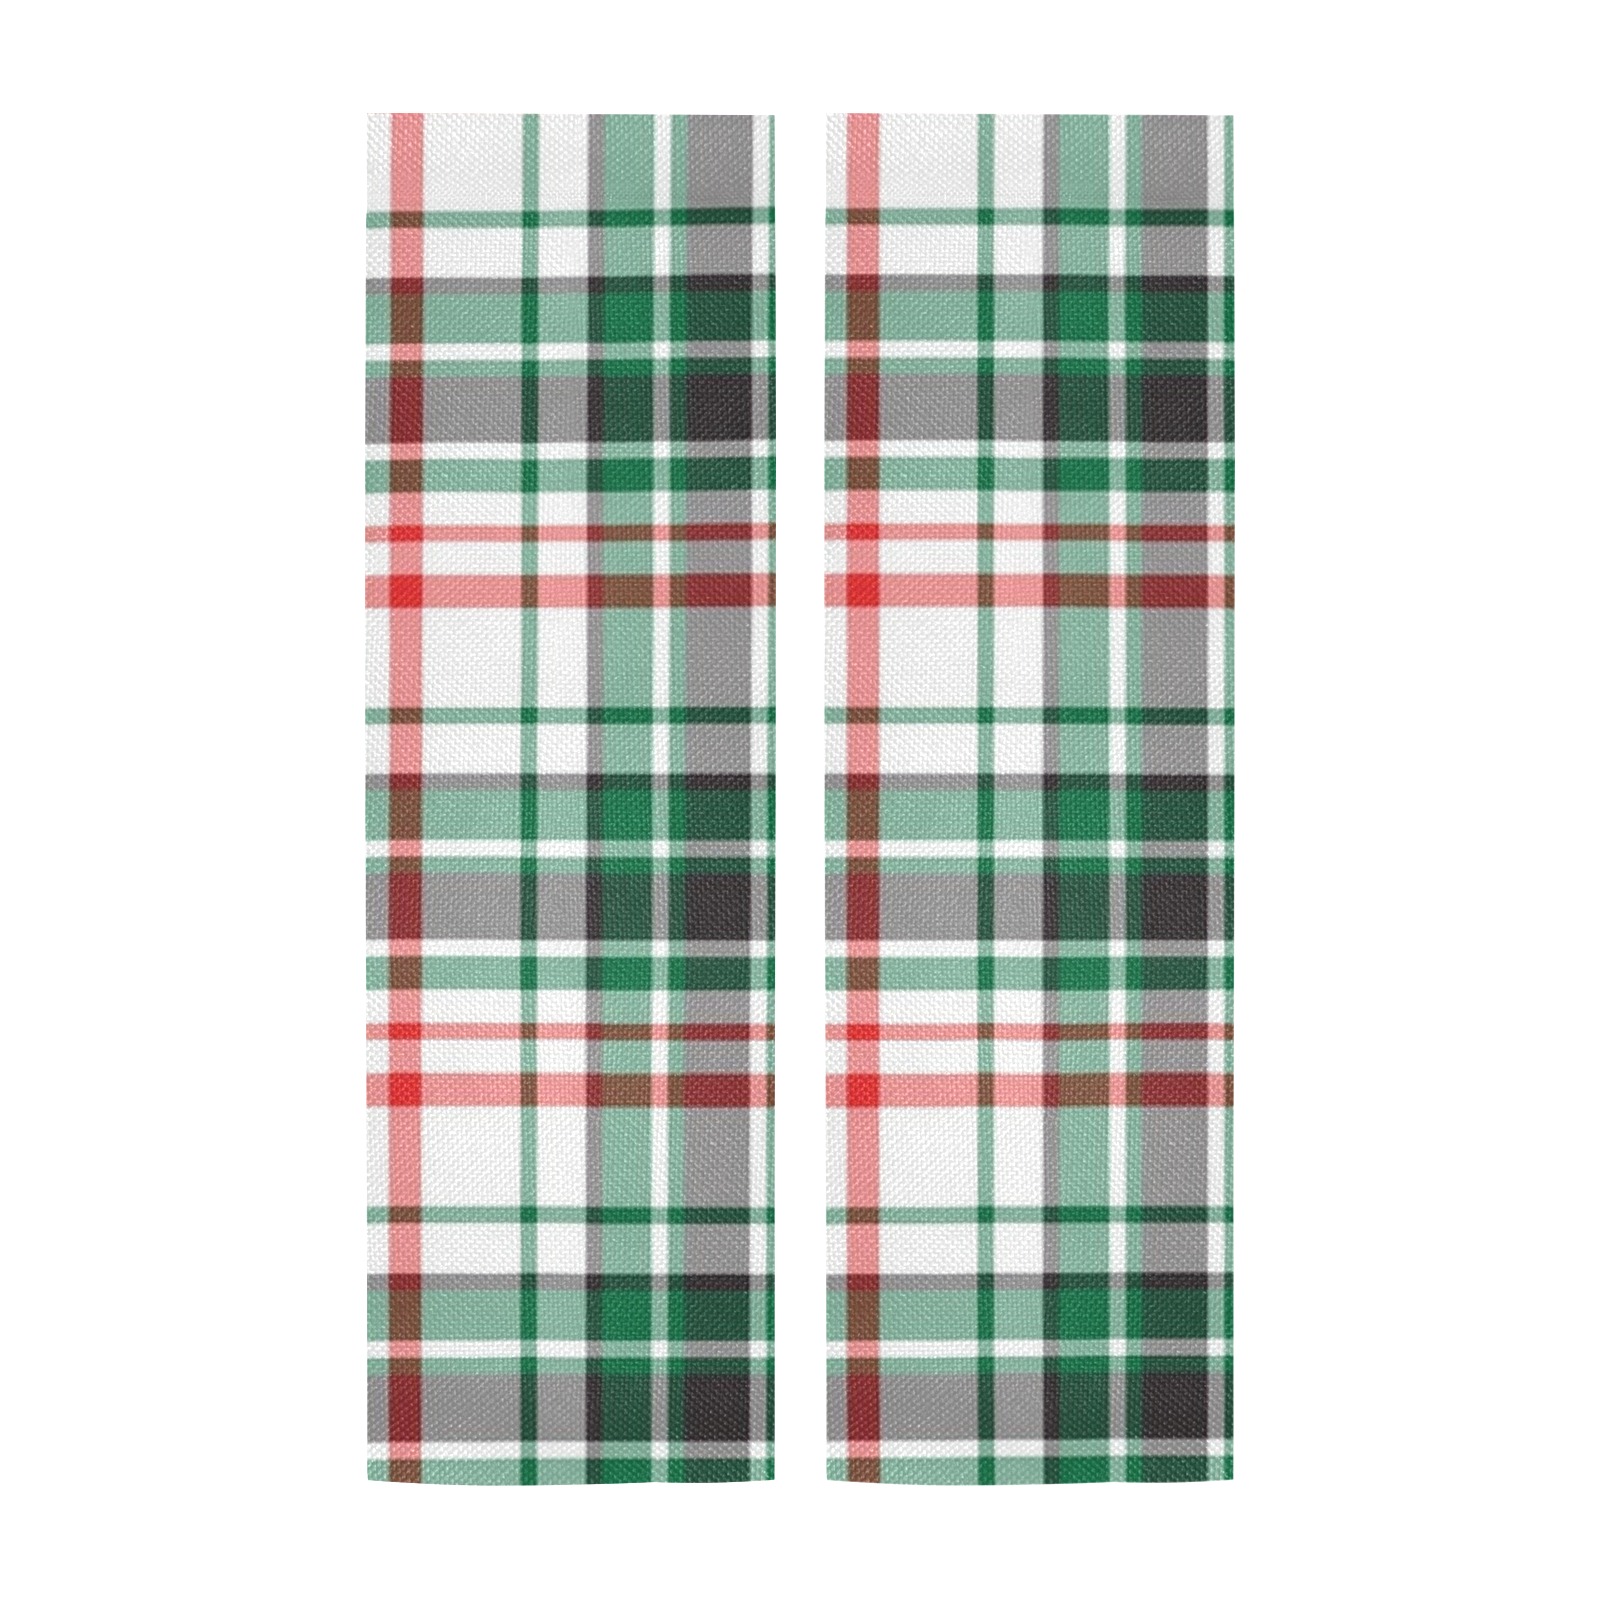 Holiday Plaid Door Curtain Tapestry